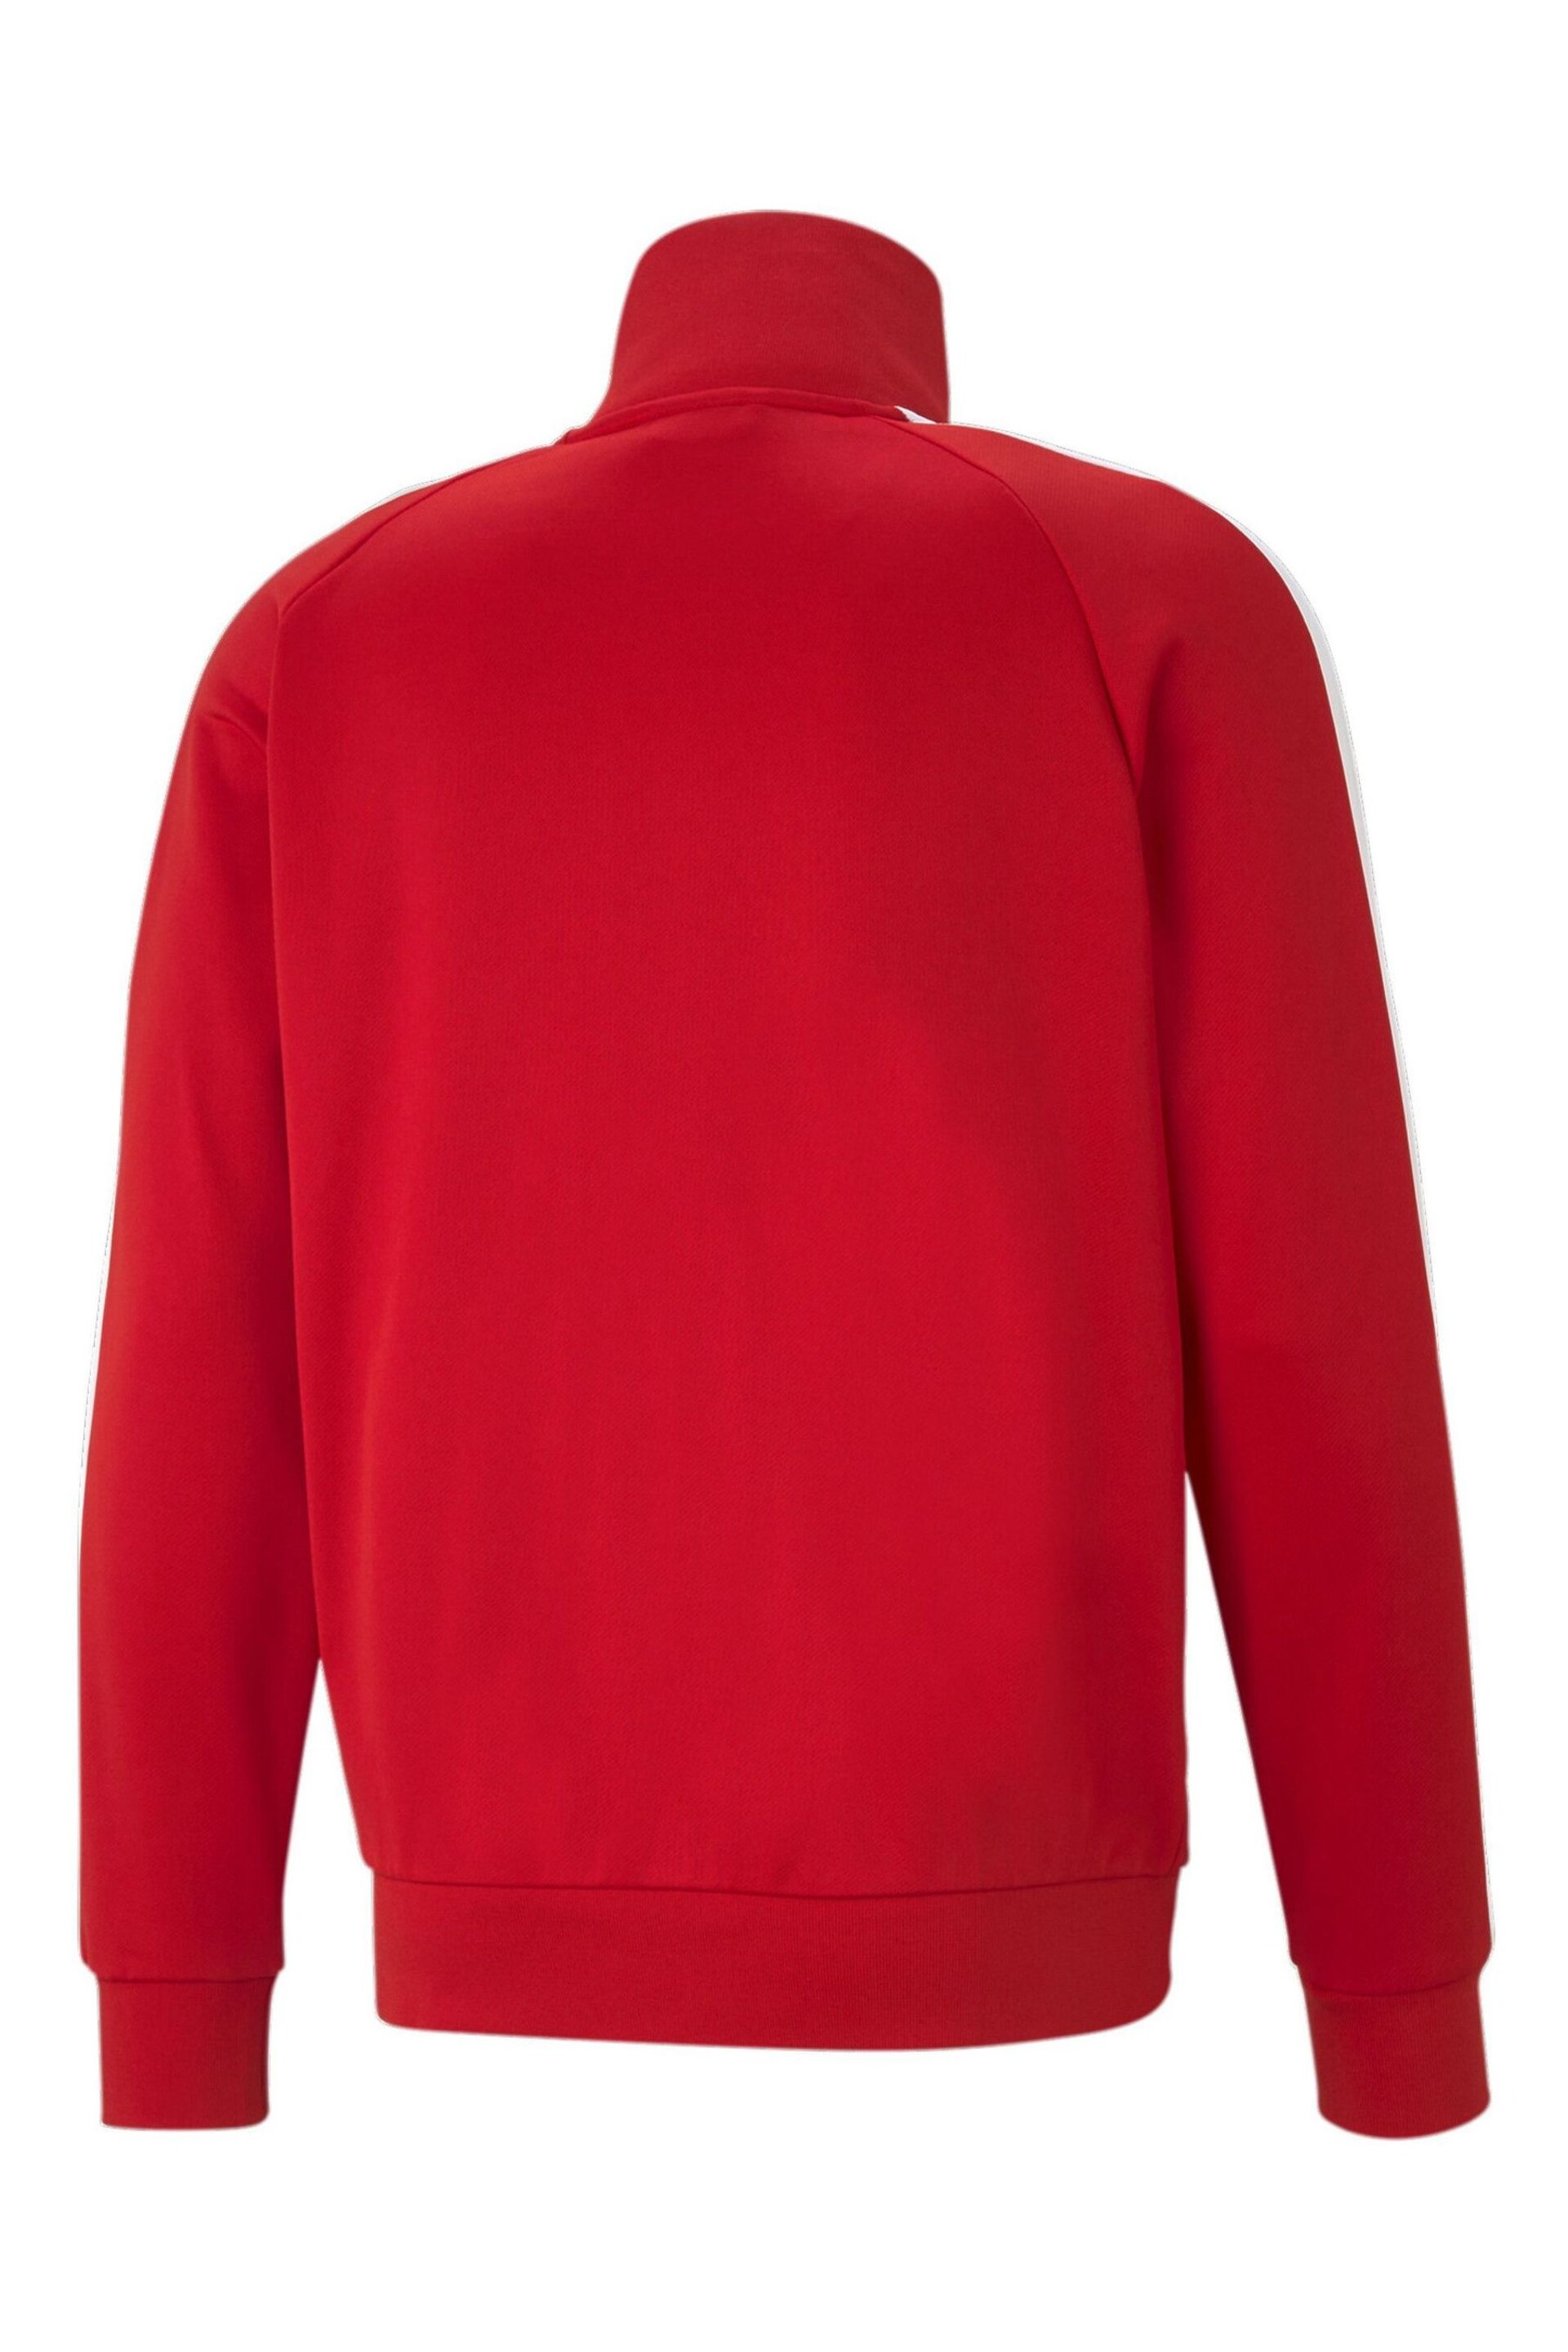 Puma Red Iconic T7 Mens Track Jacket - Image 5 of 5